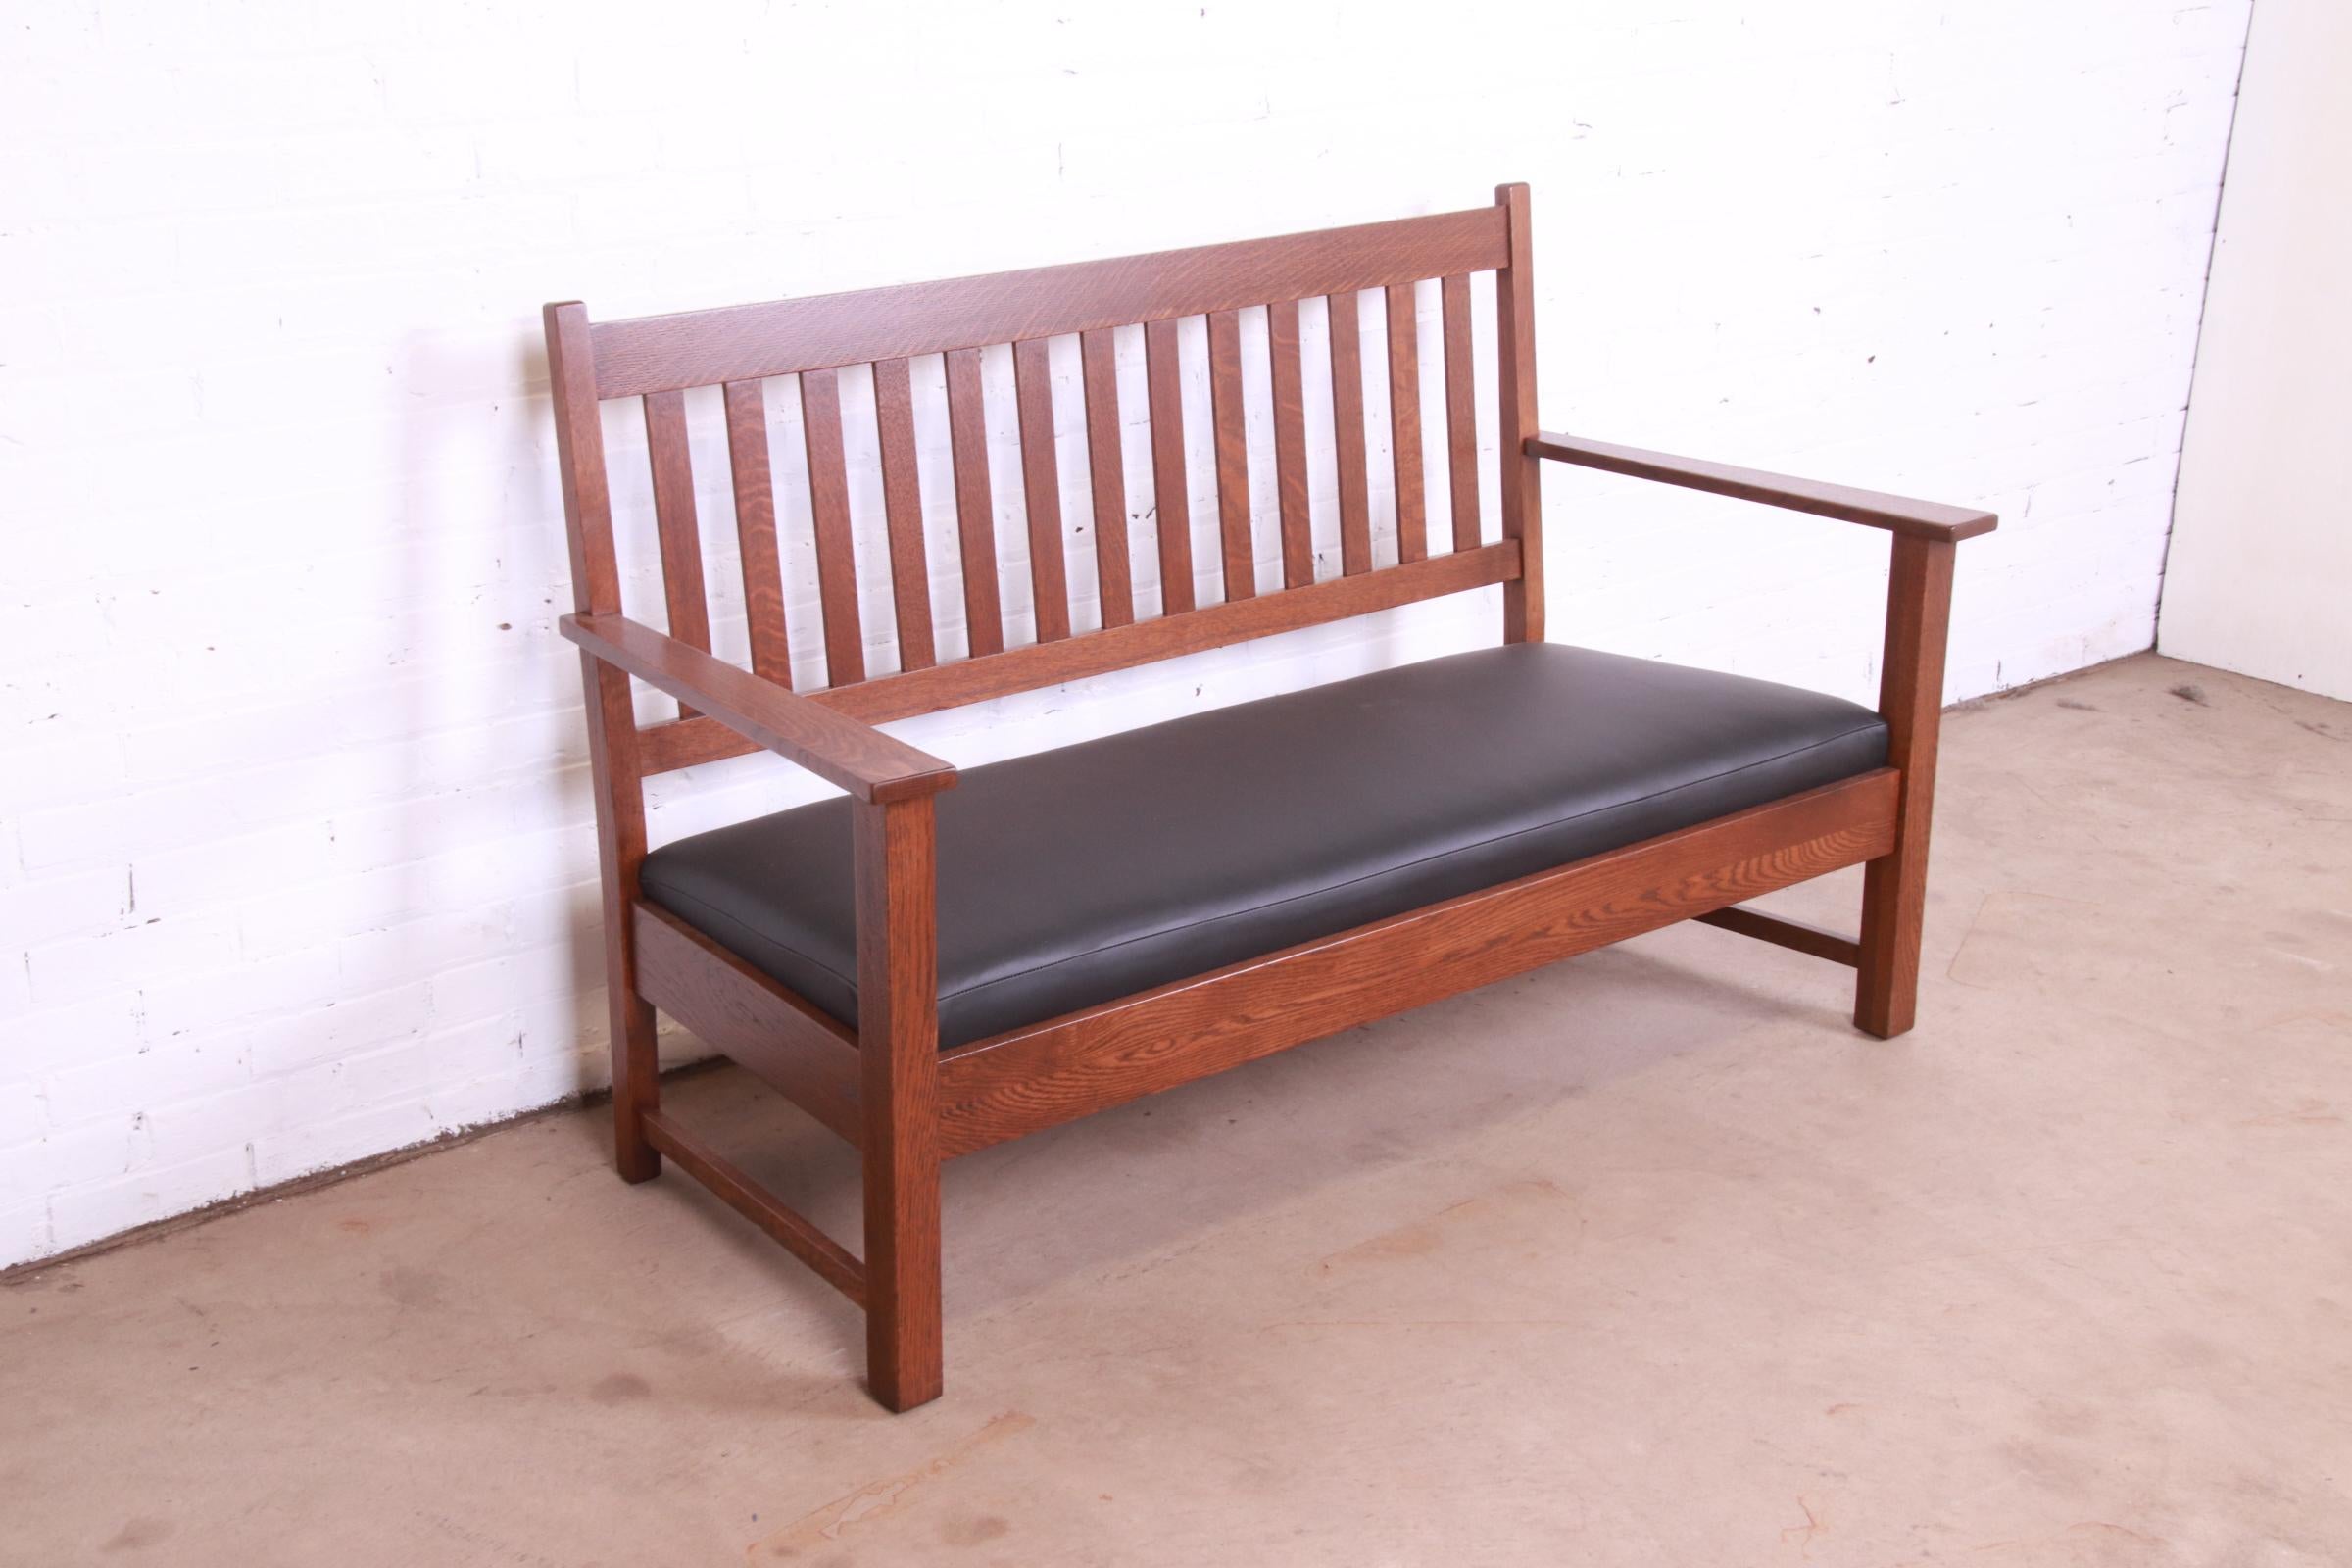 Arts and Crafts Limbert Mission Oak Arts & Crafts Open Arm Sofa or Settee, Fully Restored For Sale